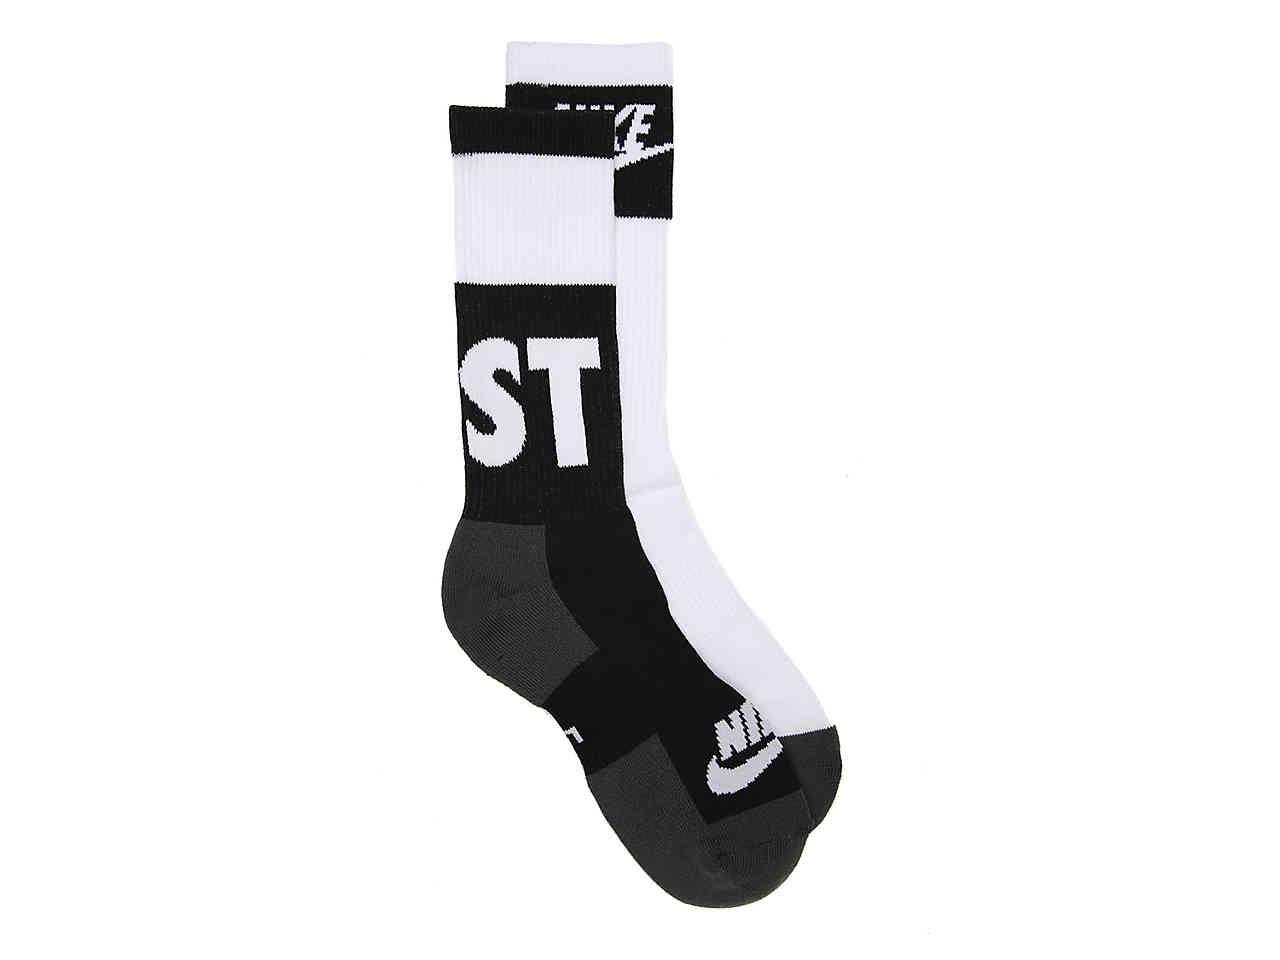 Nike Synthetic Just Do It Crew Socks in 